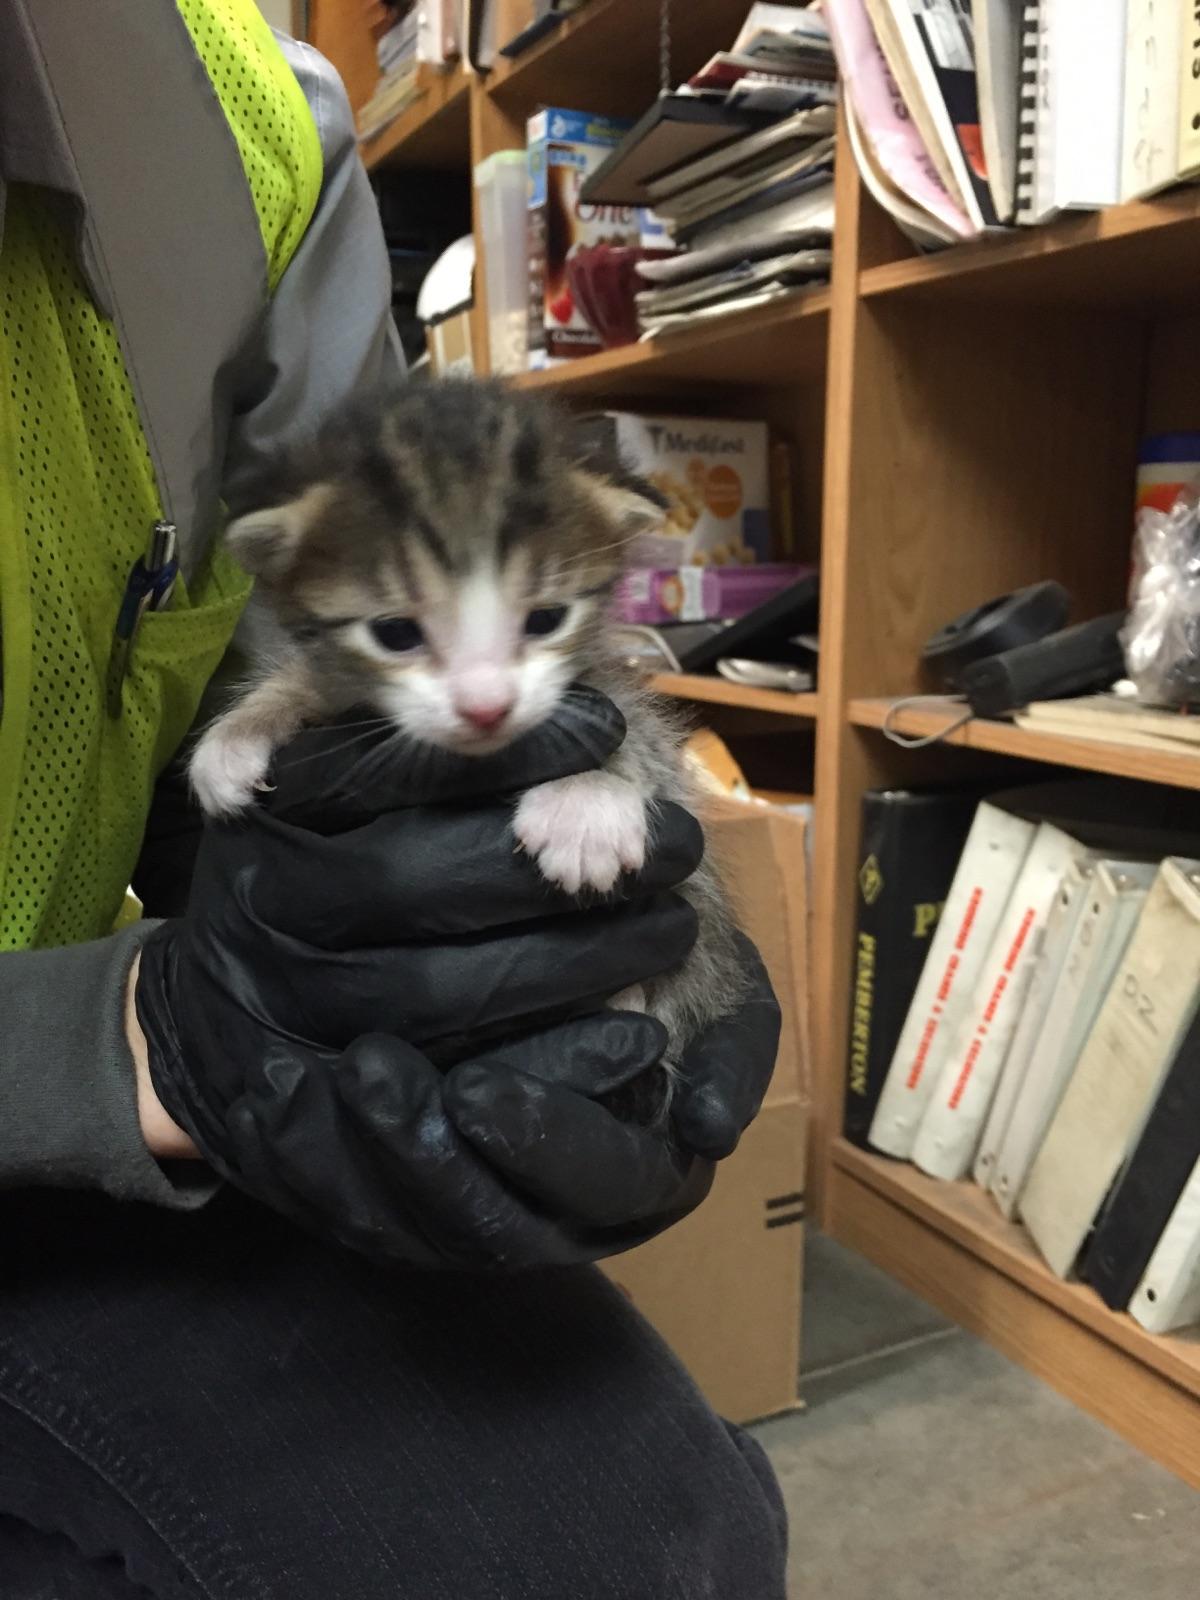 PHOTO: A kitten was rescued at a recycling facility in Galt, Calif. on Dec.15, 2015 and adopted by an employee.